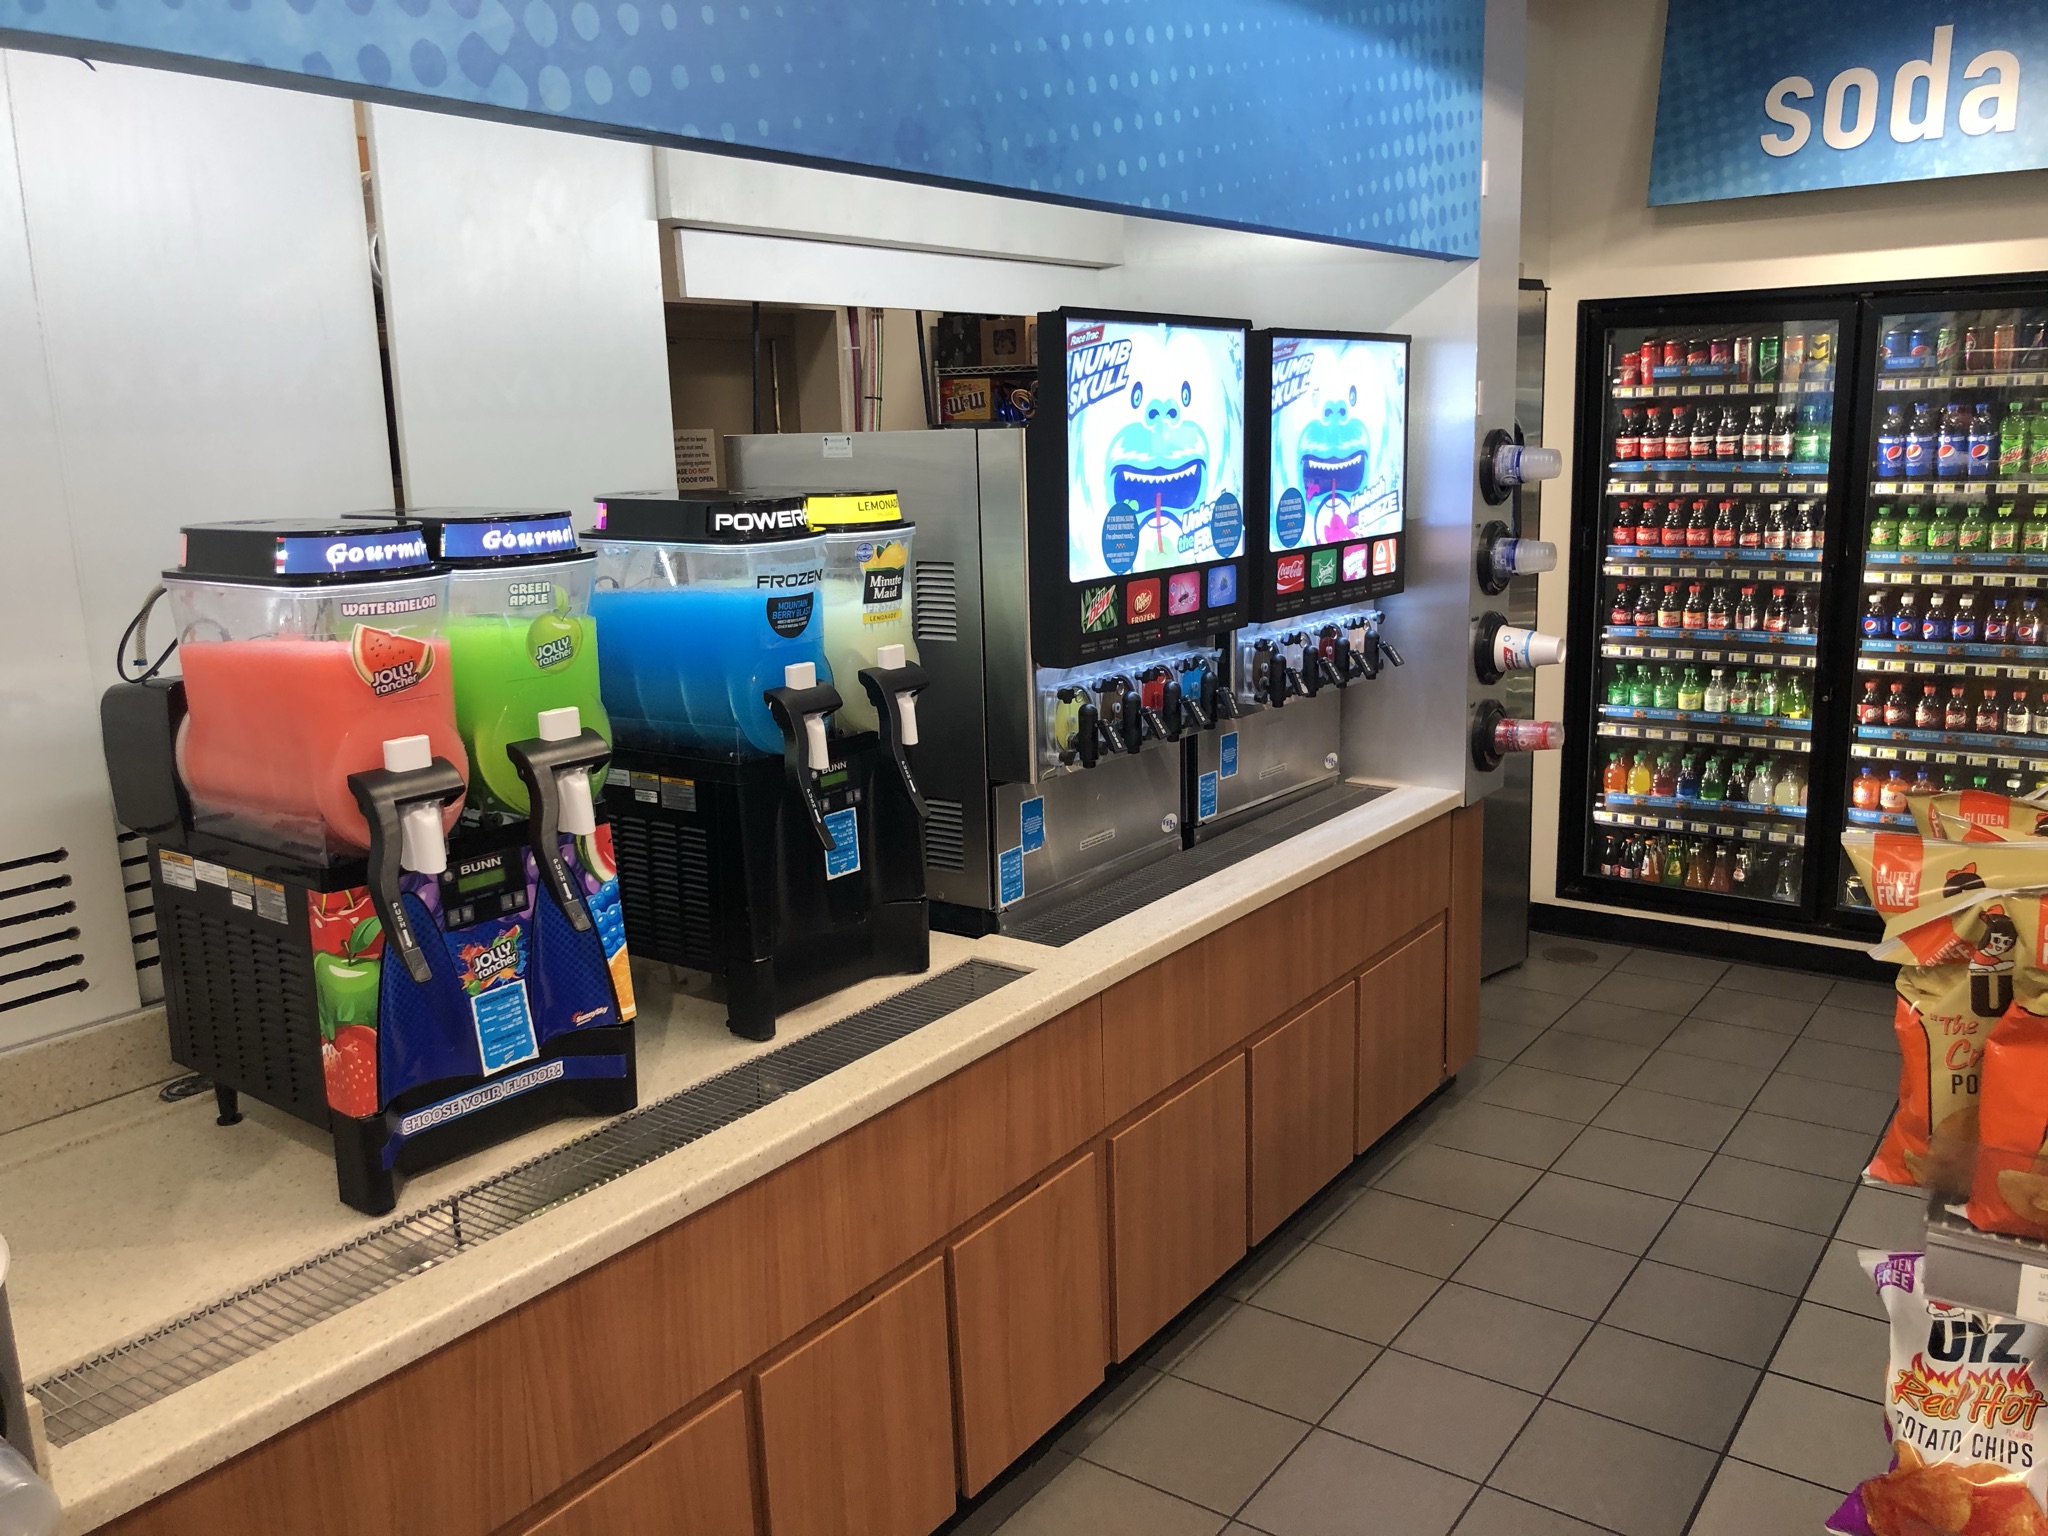 Available property at RaceTrac Frozen Drink Machines